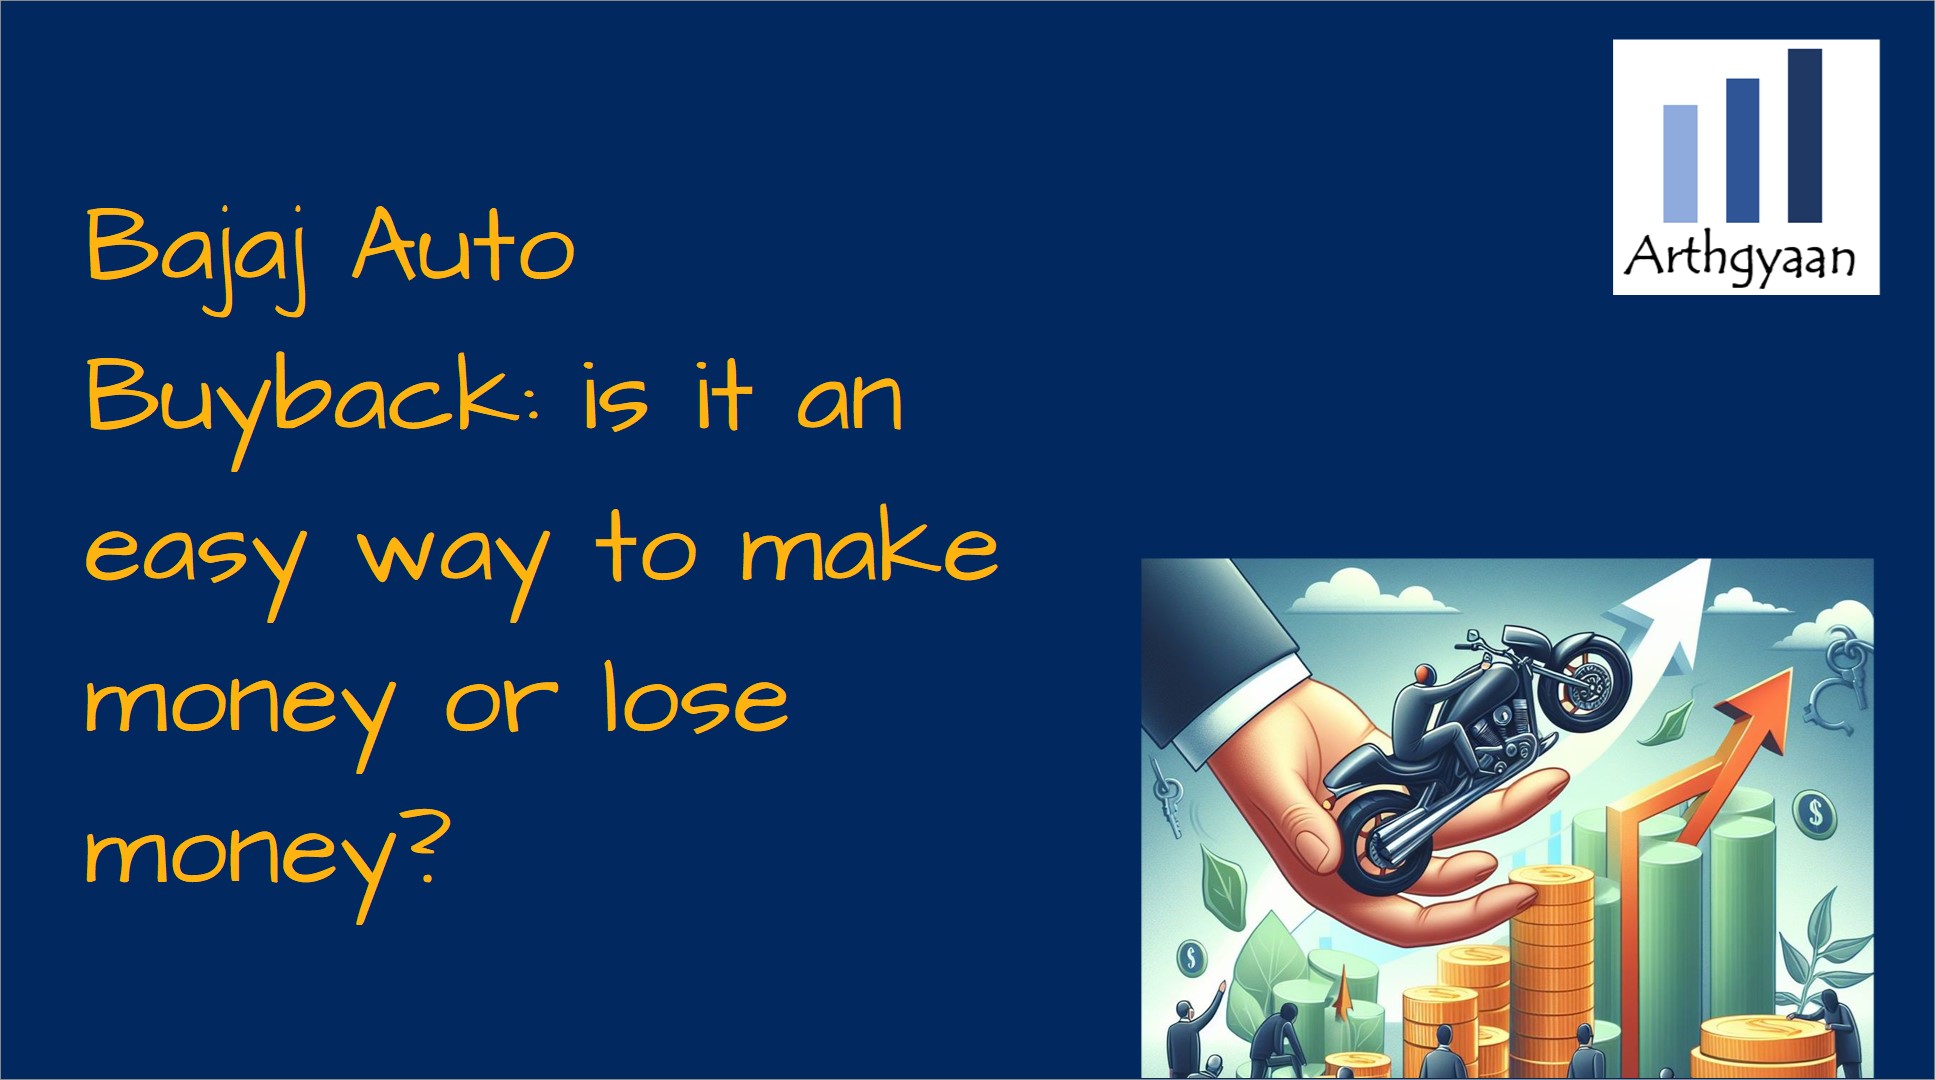 Bajaj Auto Buyback: is it an easy way to make money or lose money?